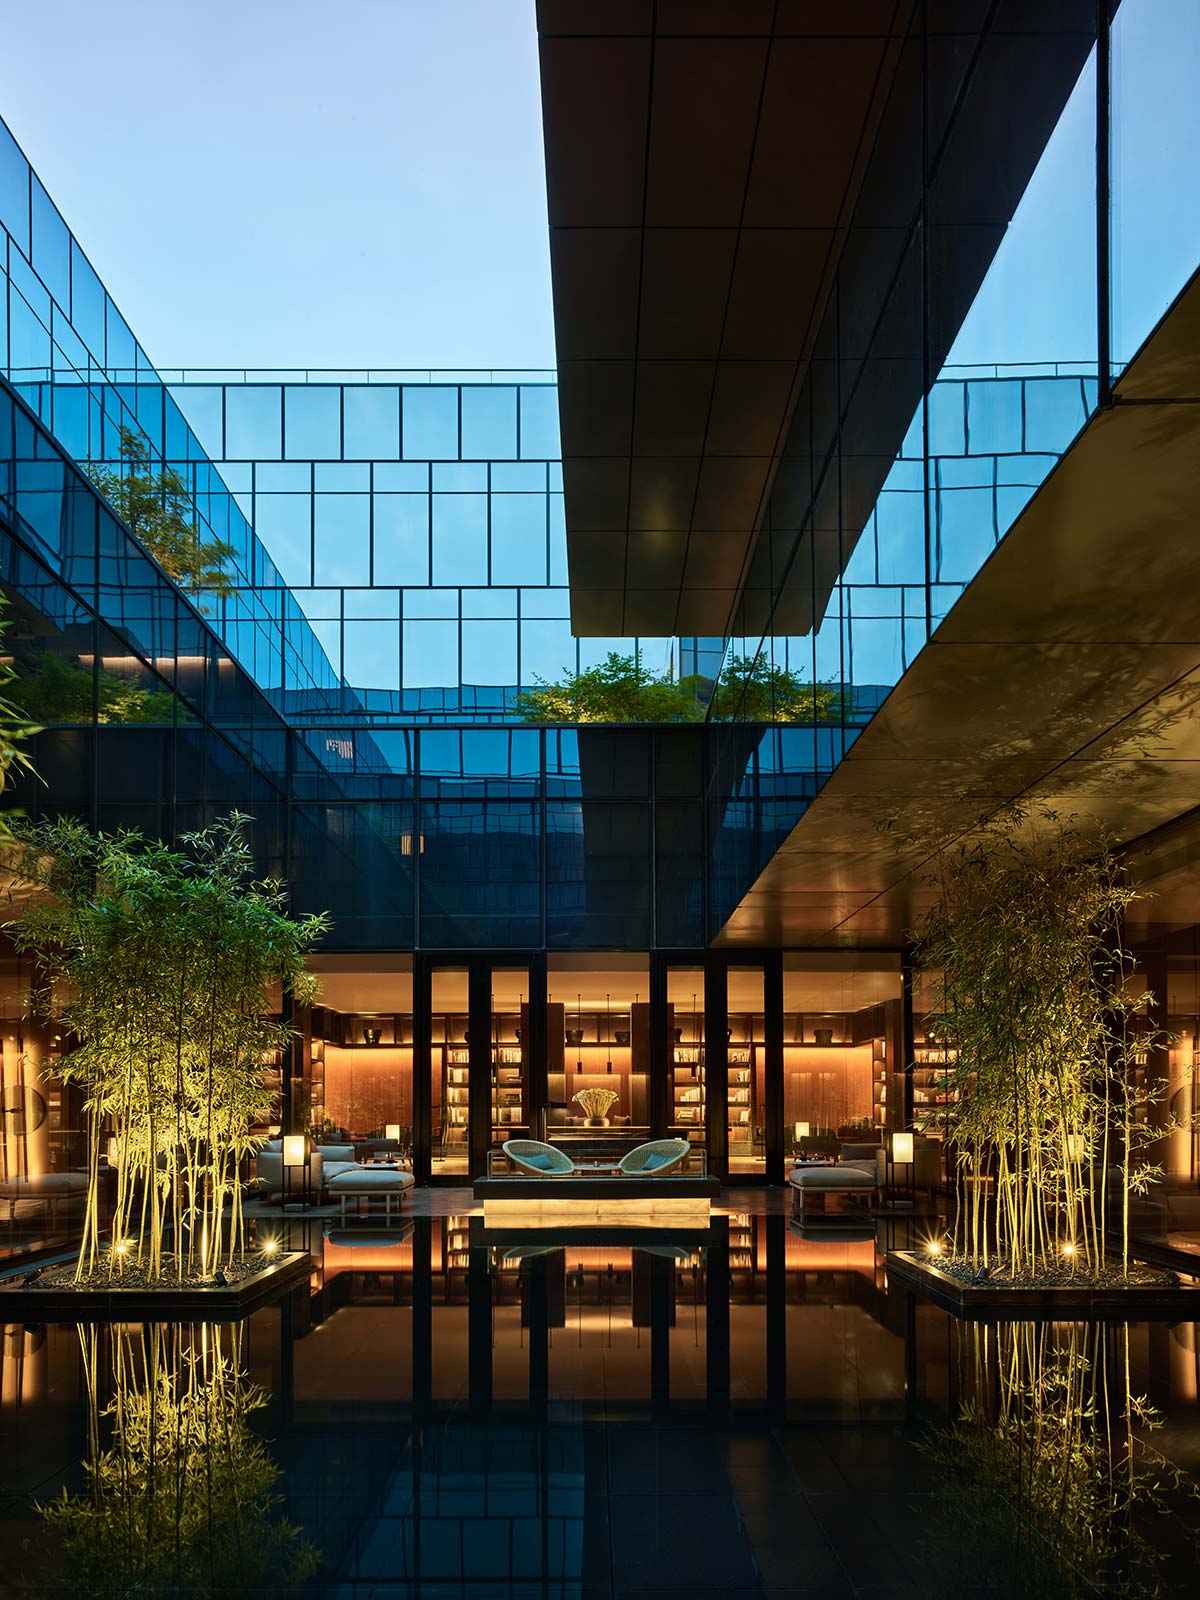 The Puxuan Hotel and Spa, Beijing